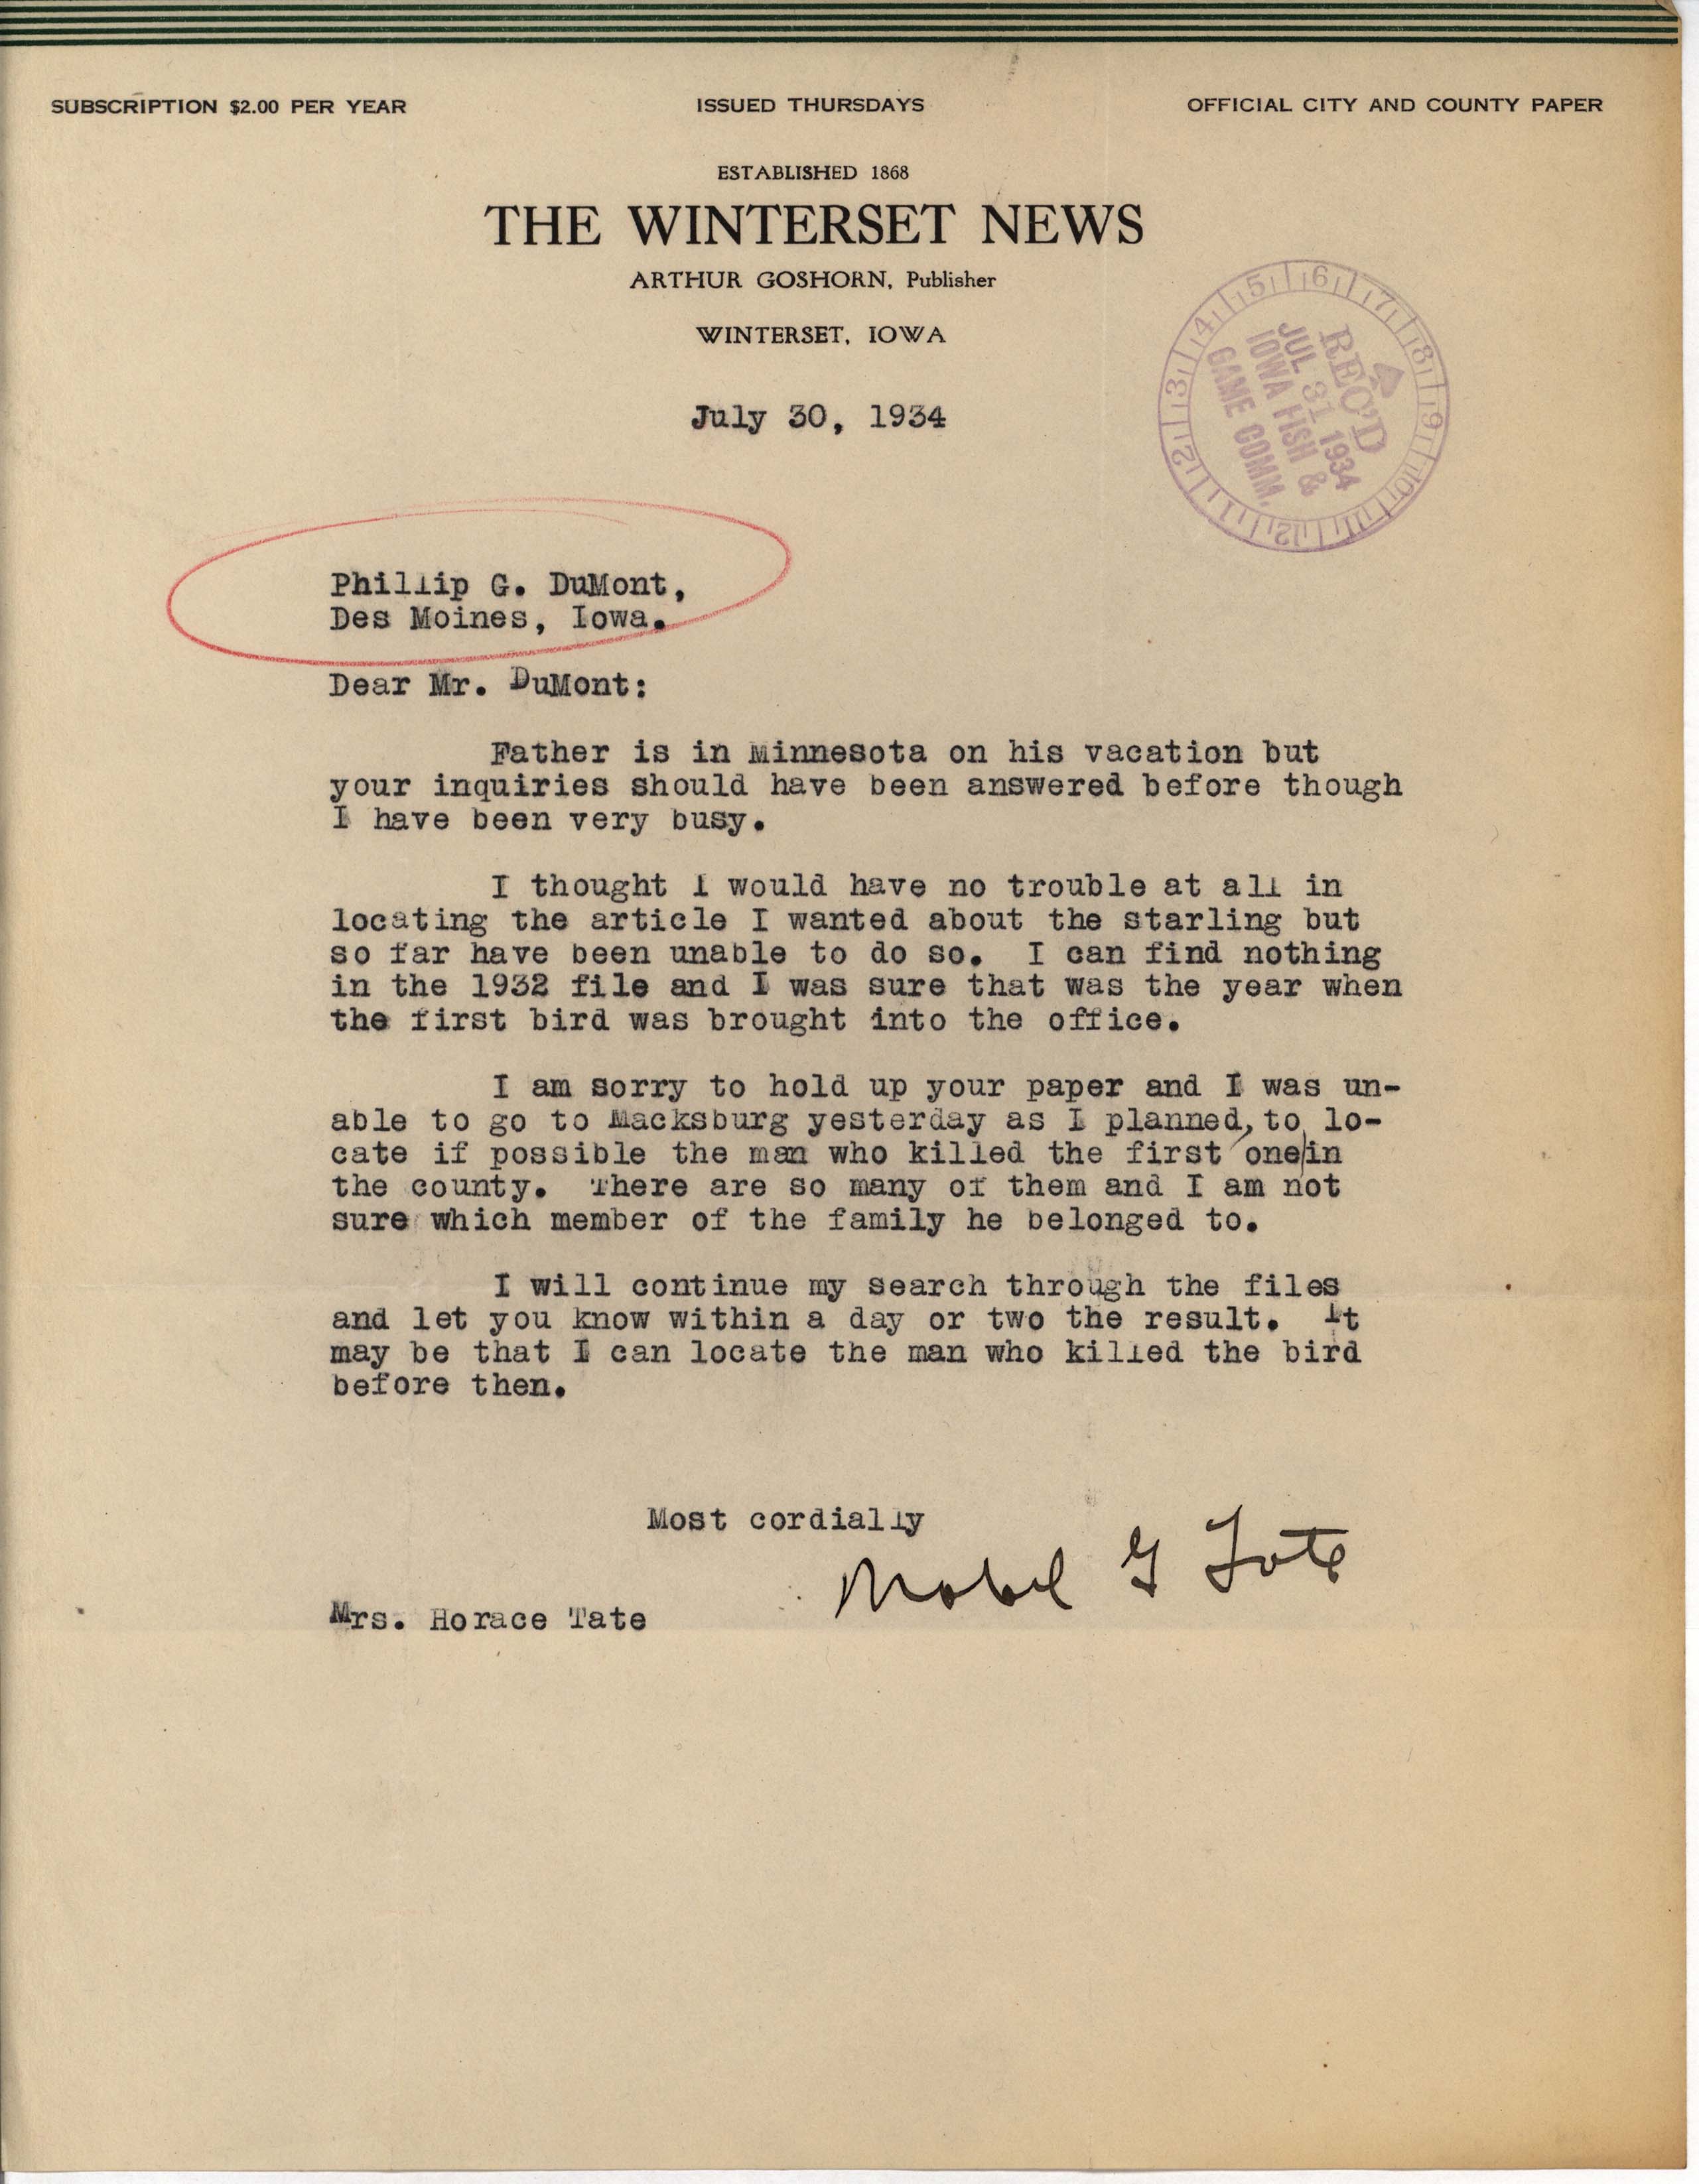 Mabel Tate letter to Philip DuMont regarding Starling article, July 30, 1934